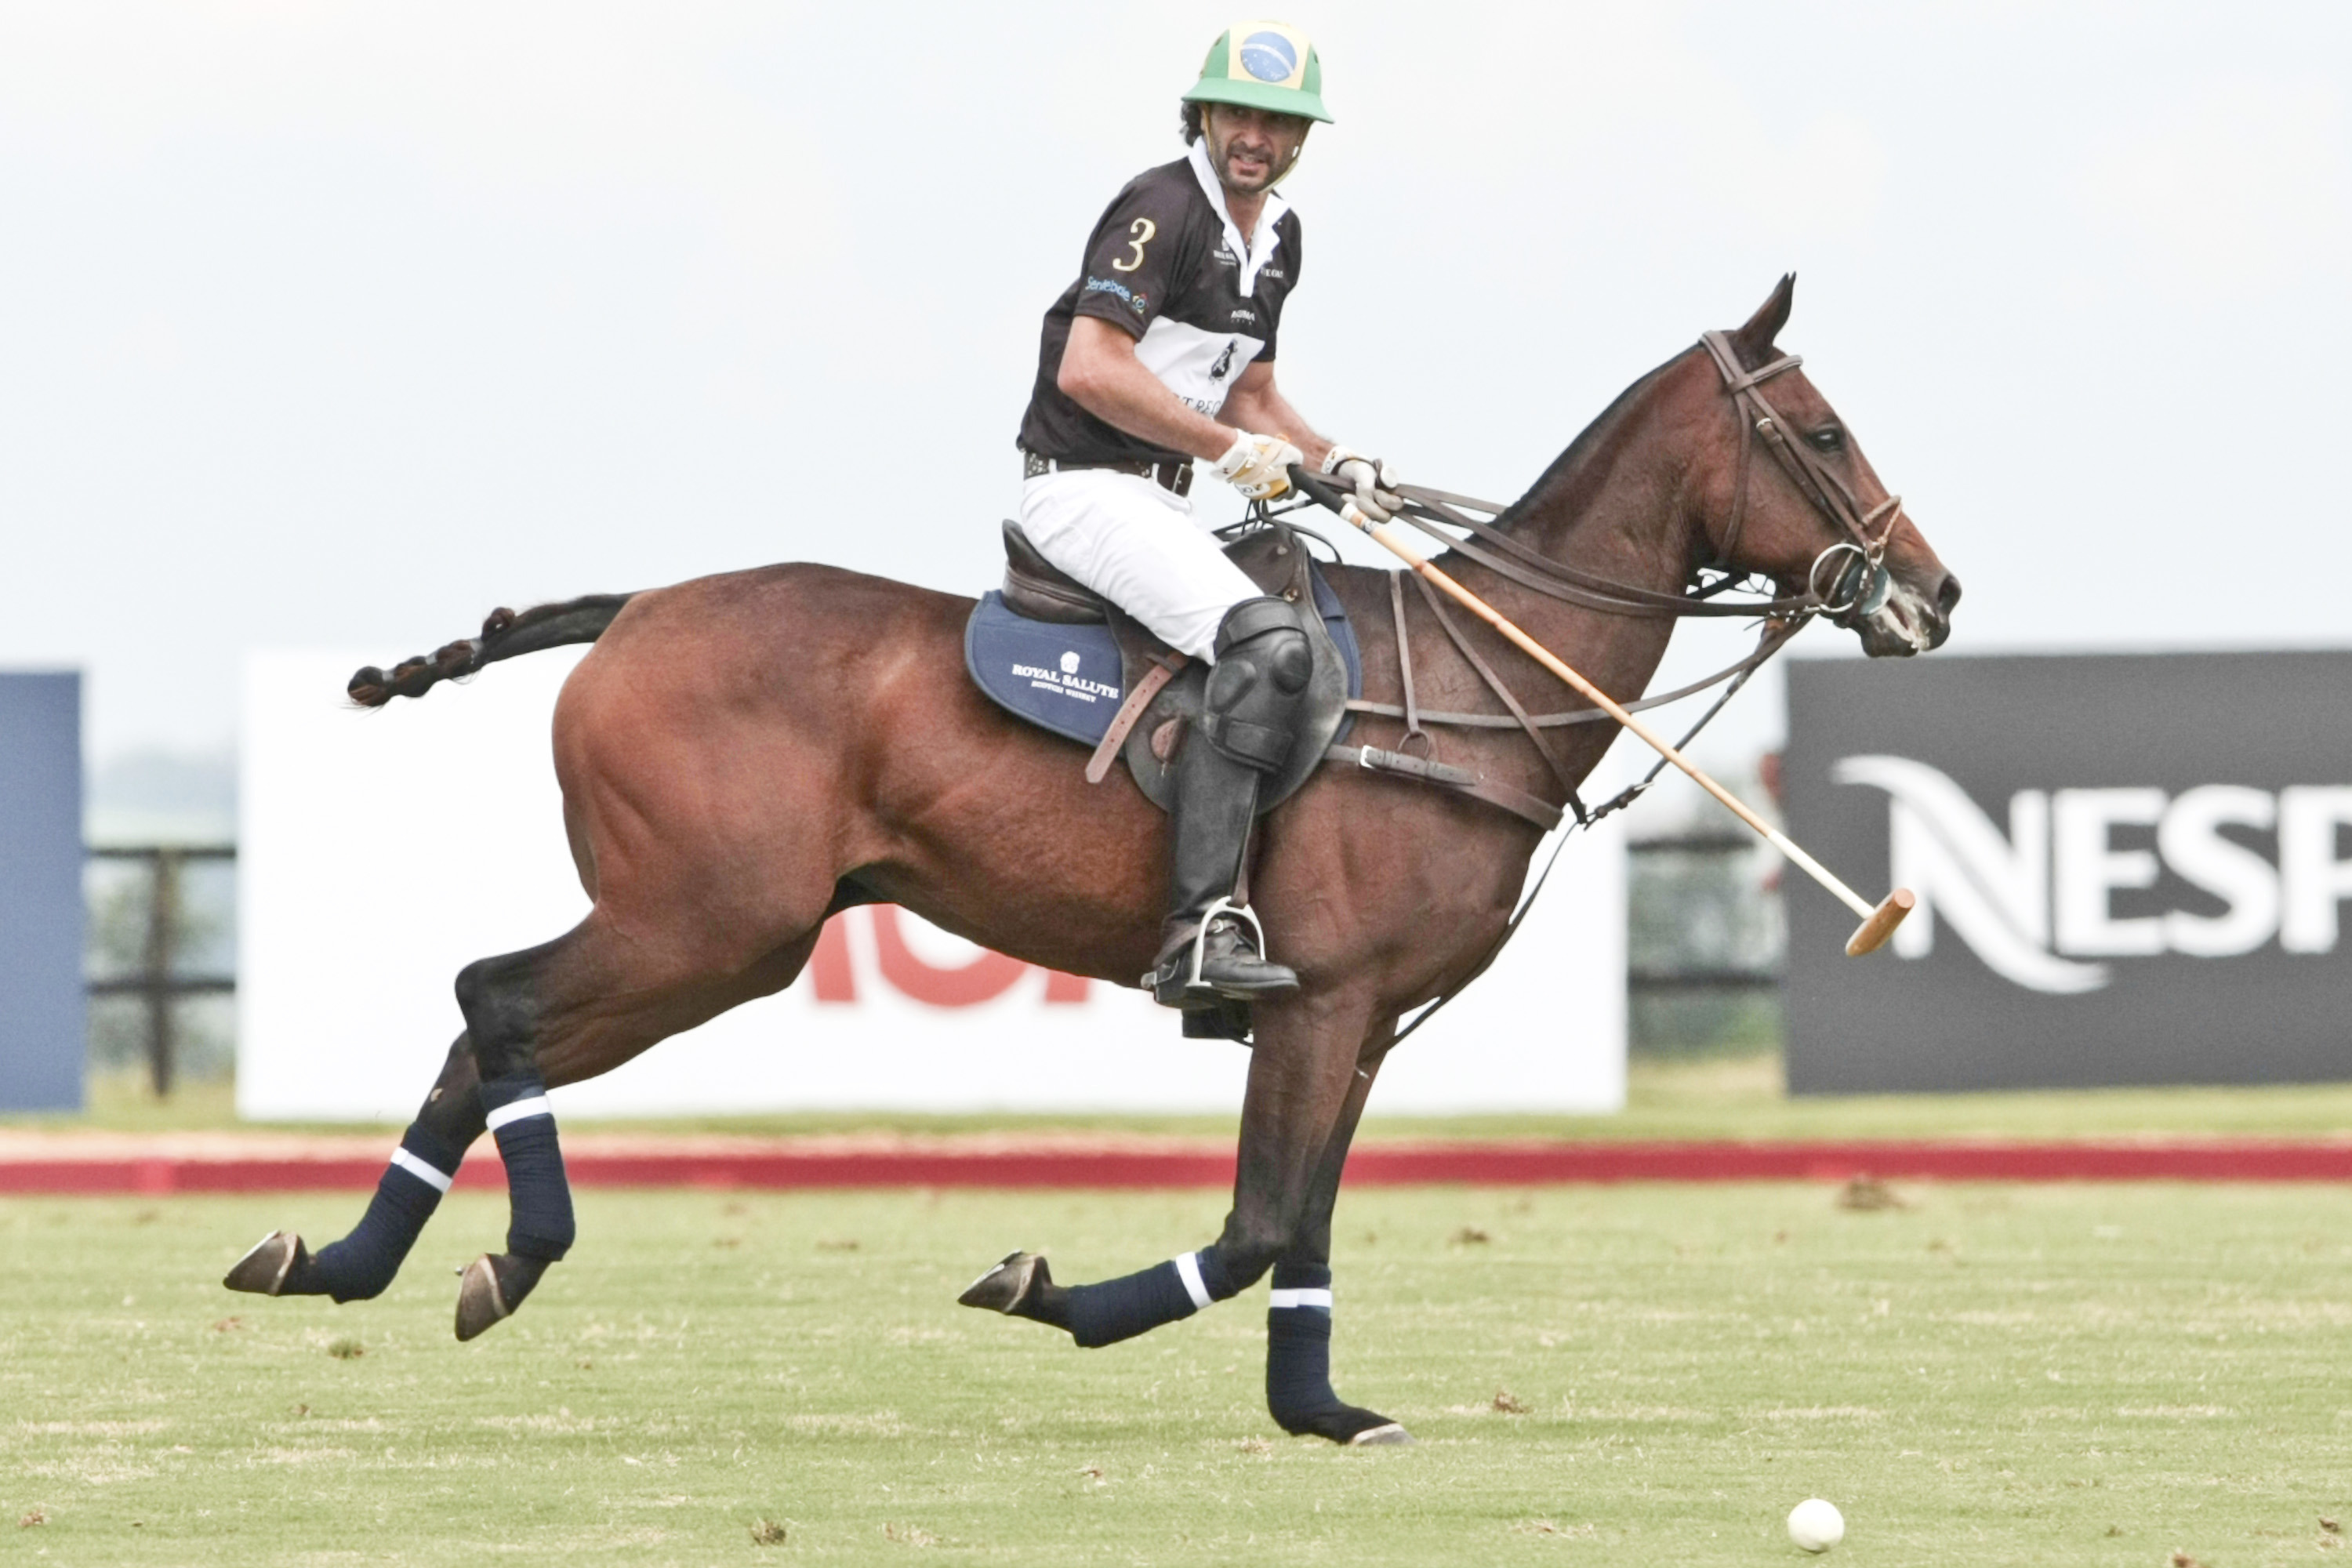 Rico Mansur rides his horse during a match as part of the Sentebale Royal Salute Polo Cup 2012